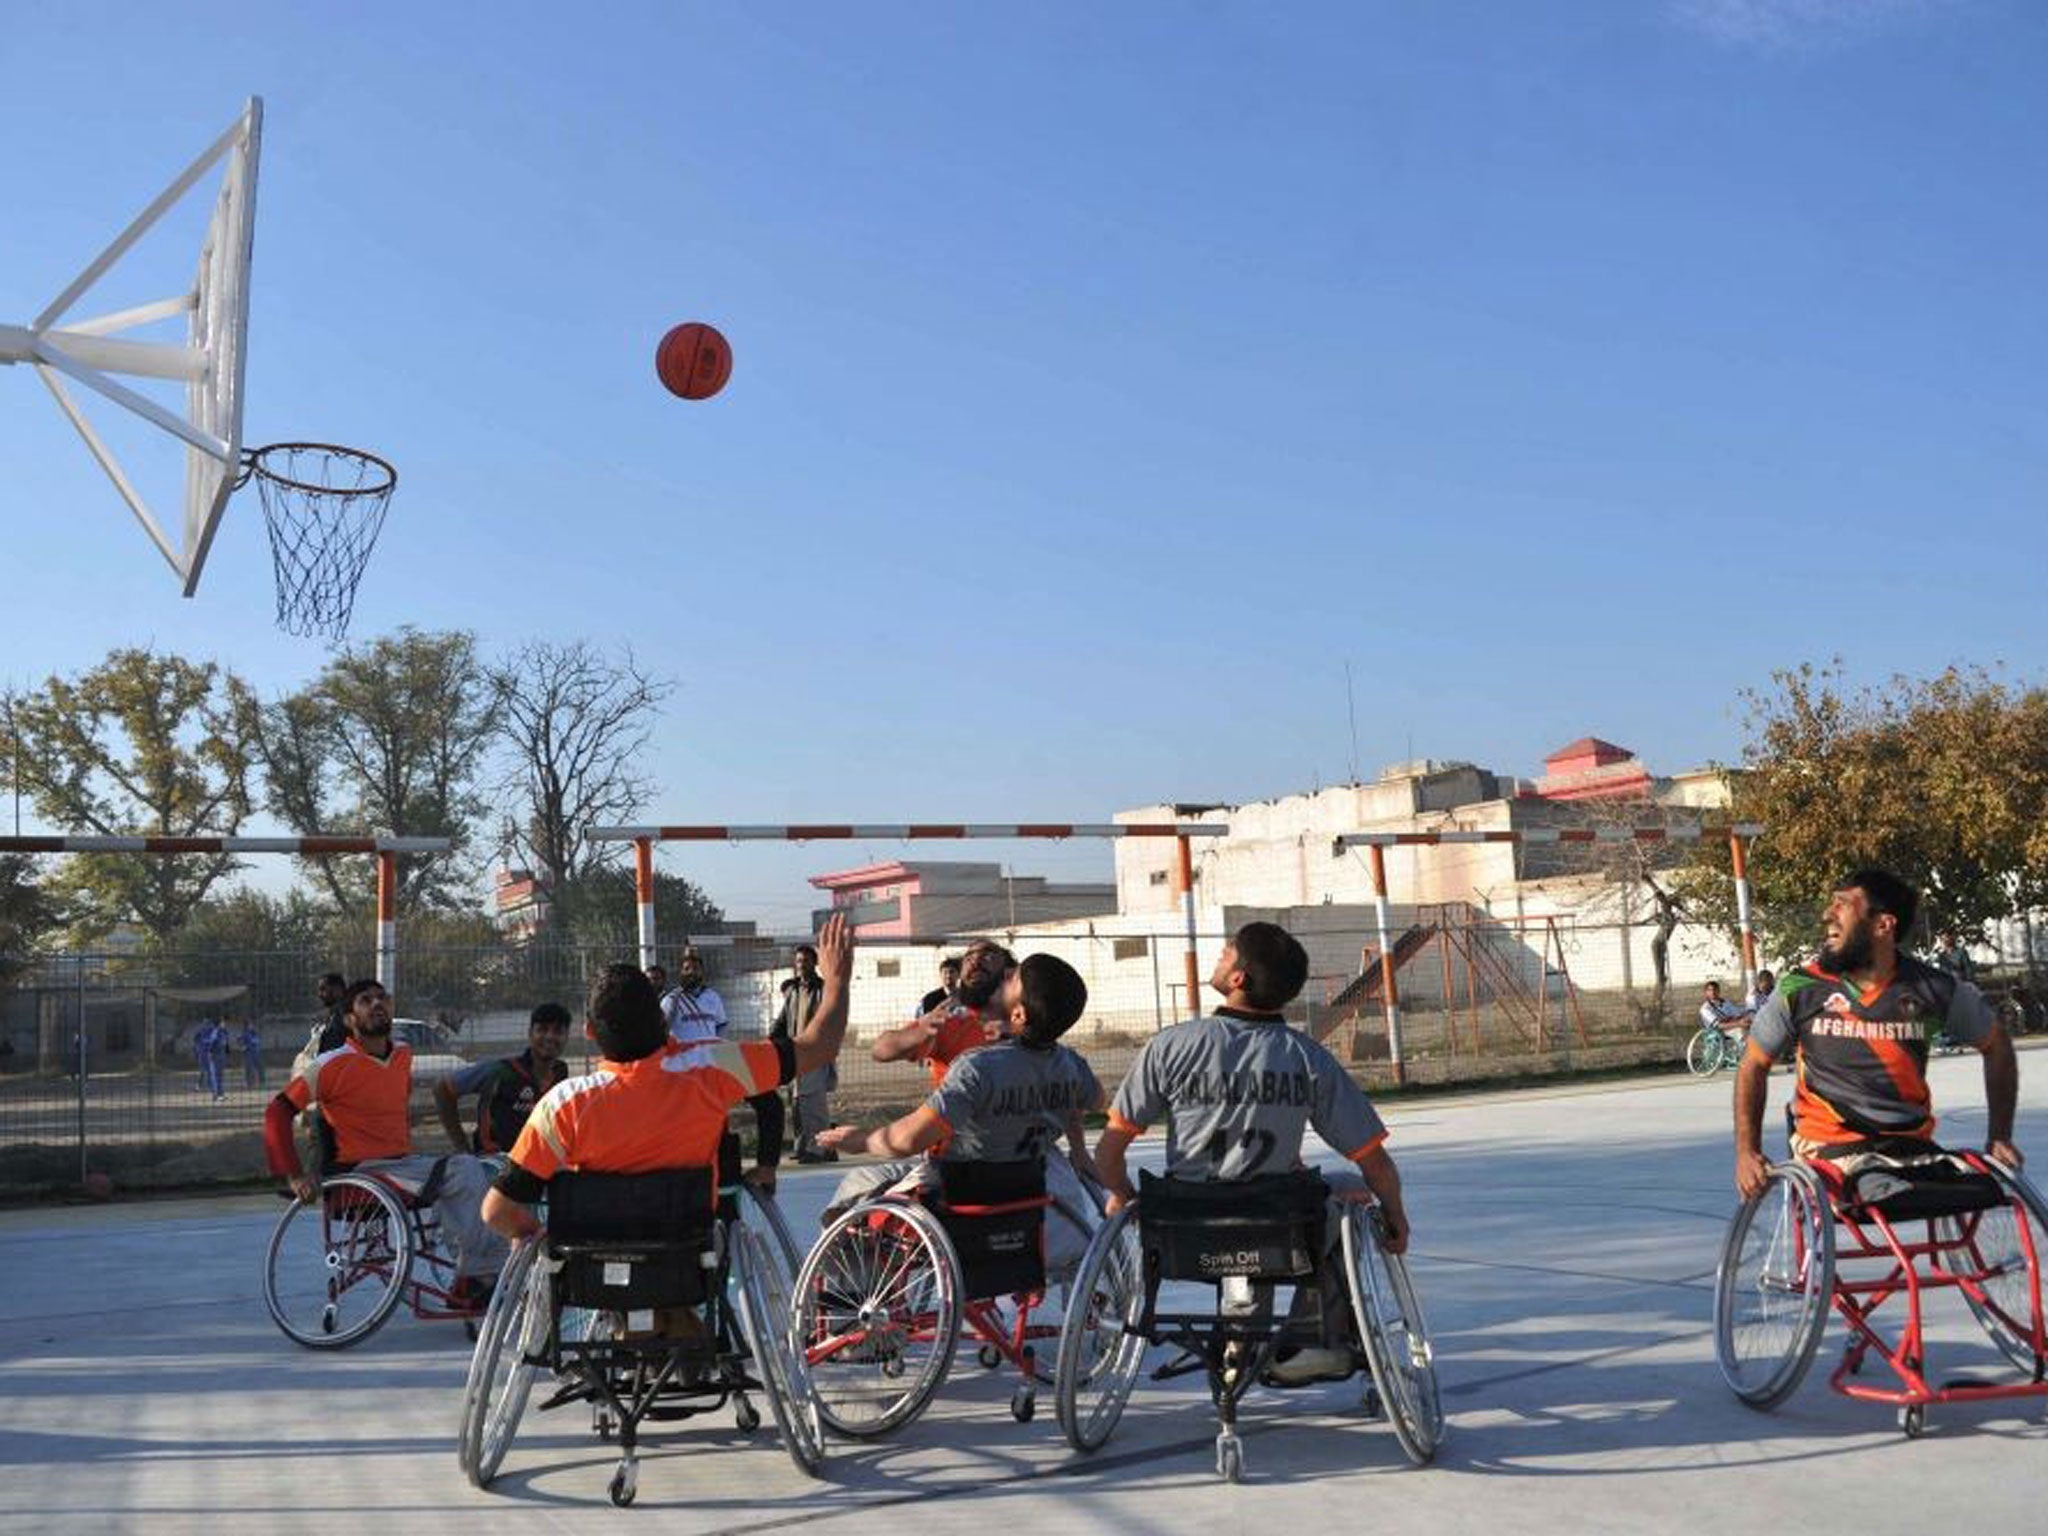 Afghan wheelchair basketball players take part in a match at a club for the disabled and victims of war, run by the International Committee of the Red Cross on the International Day of People with Disability in Jalalabad